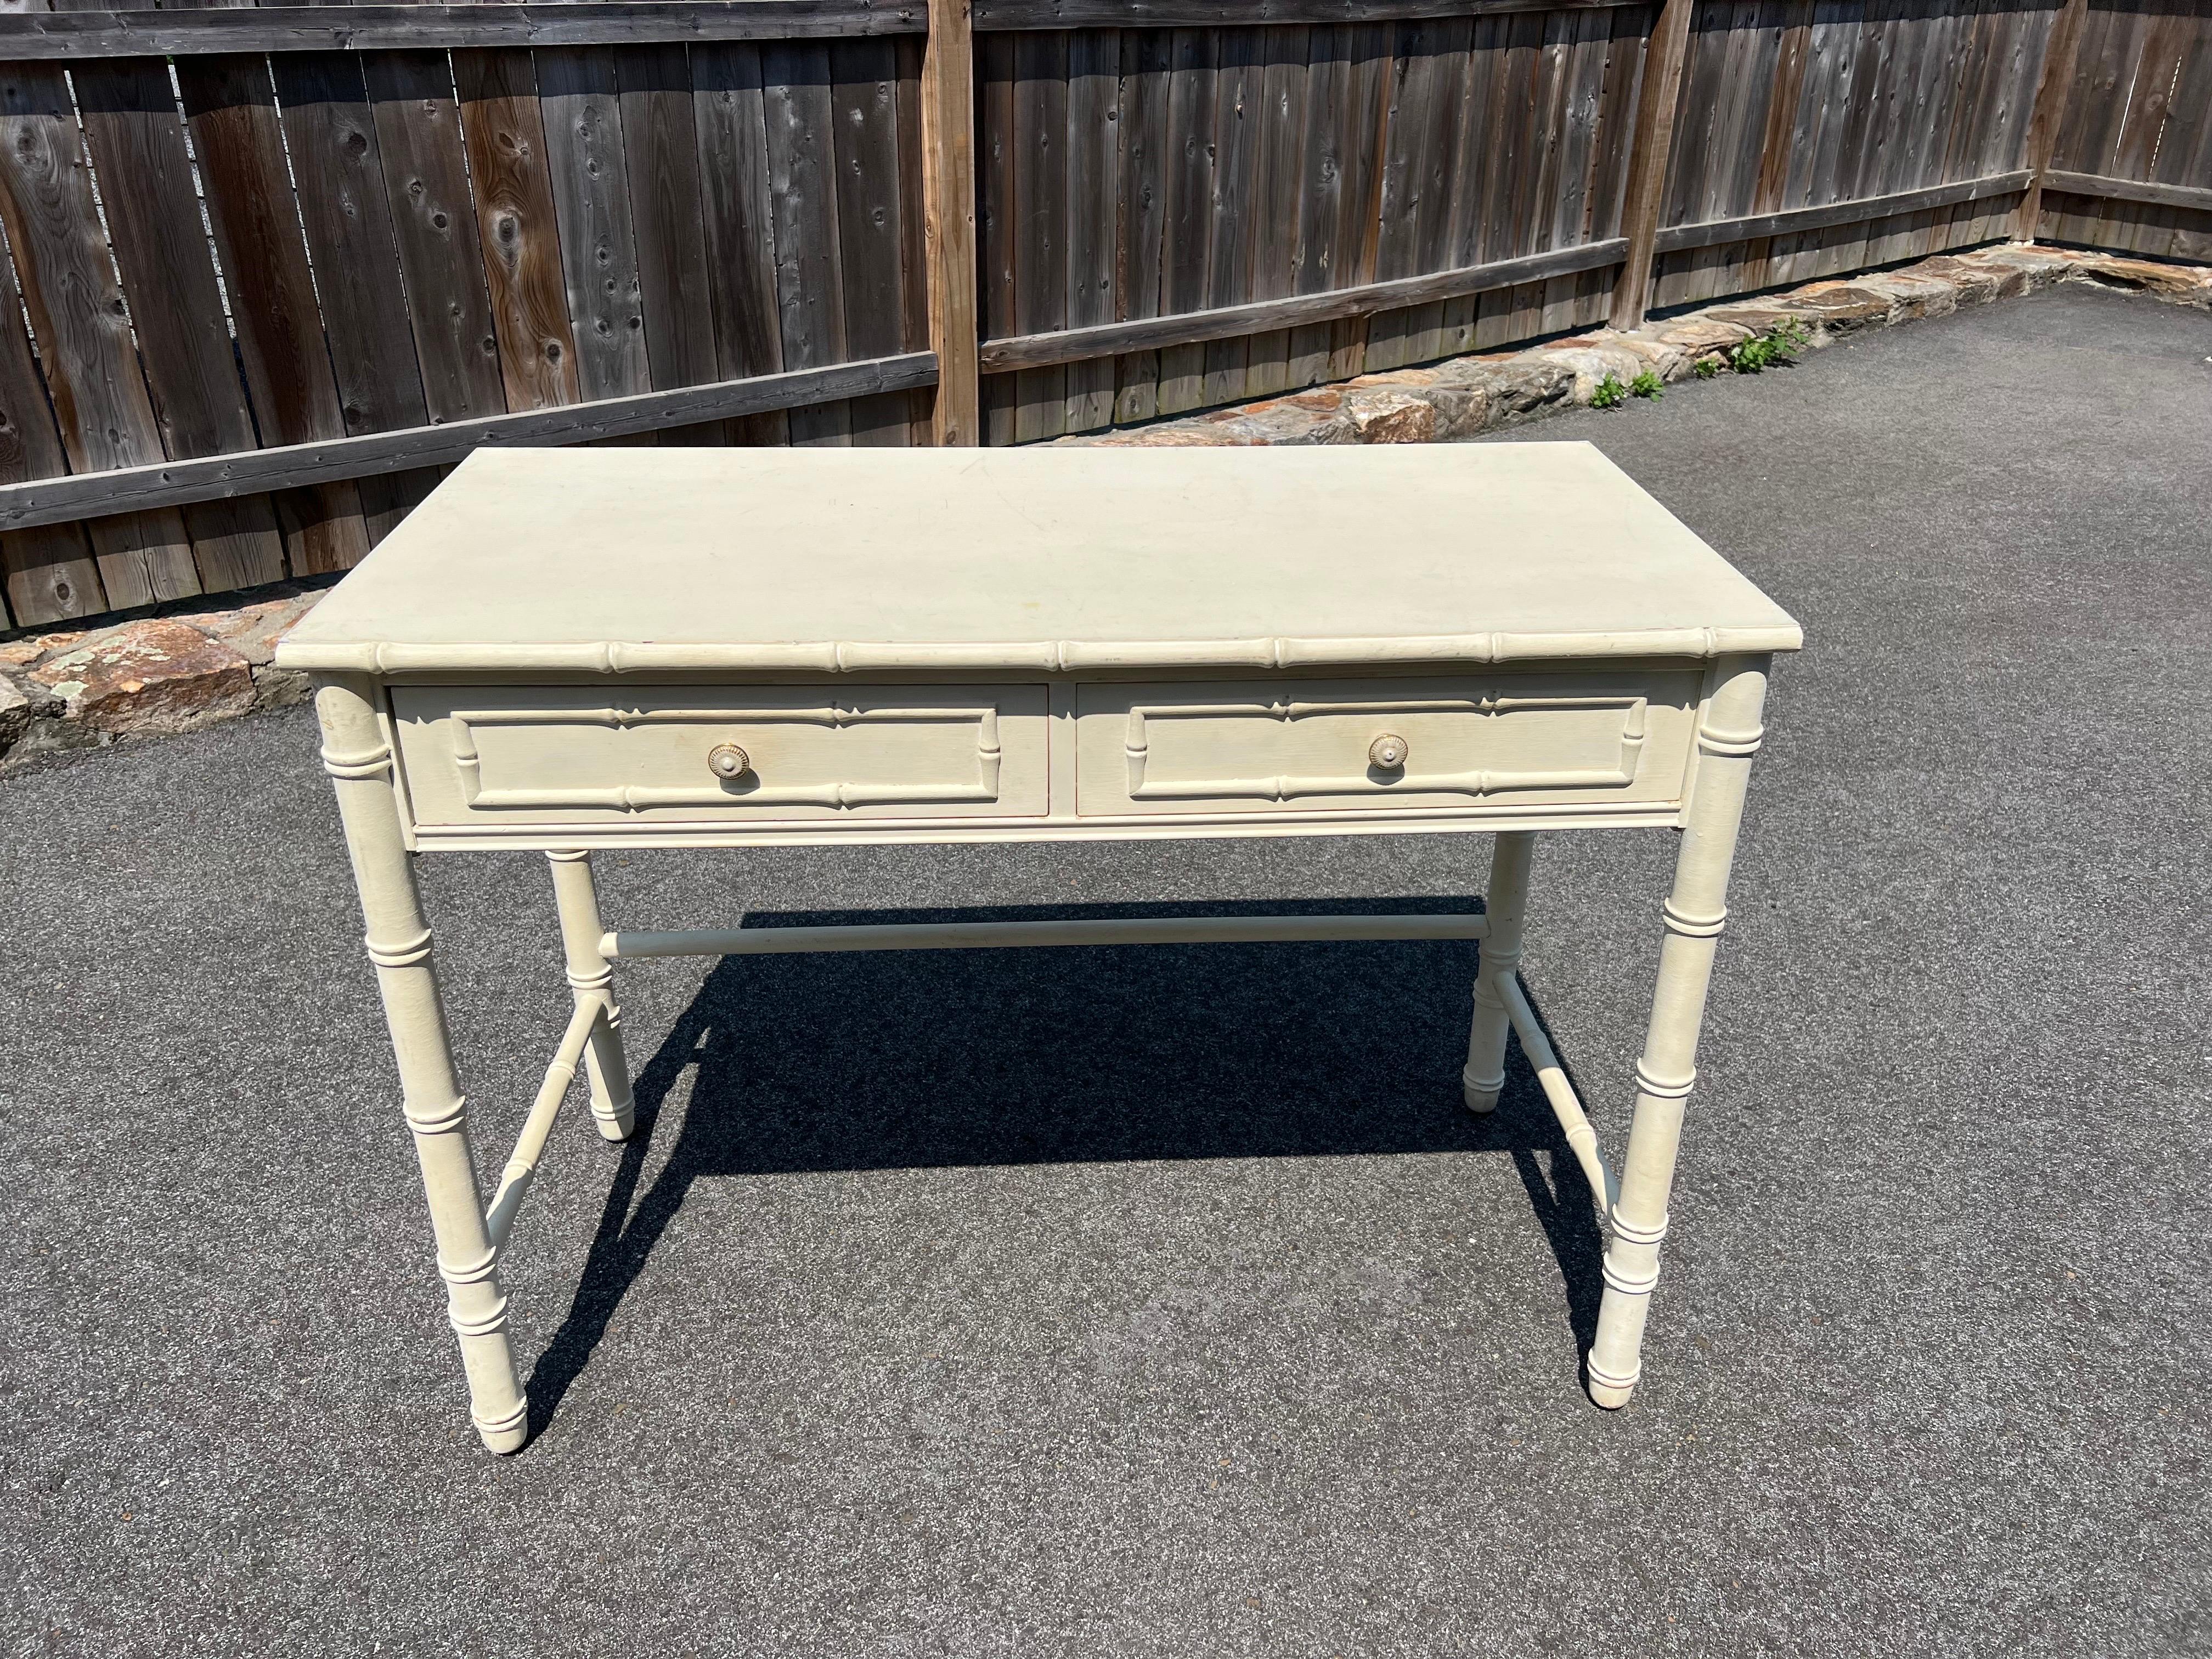 Thomasville Allegro Faux Bamboo Desk. Classic two drawer coastal style desk with faux bamboo accents. The perfect ladies writing desk with two upper drawers. Perfect size! Not too big but not too small. 